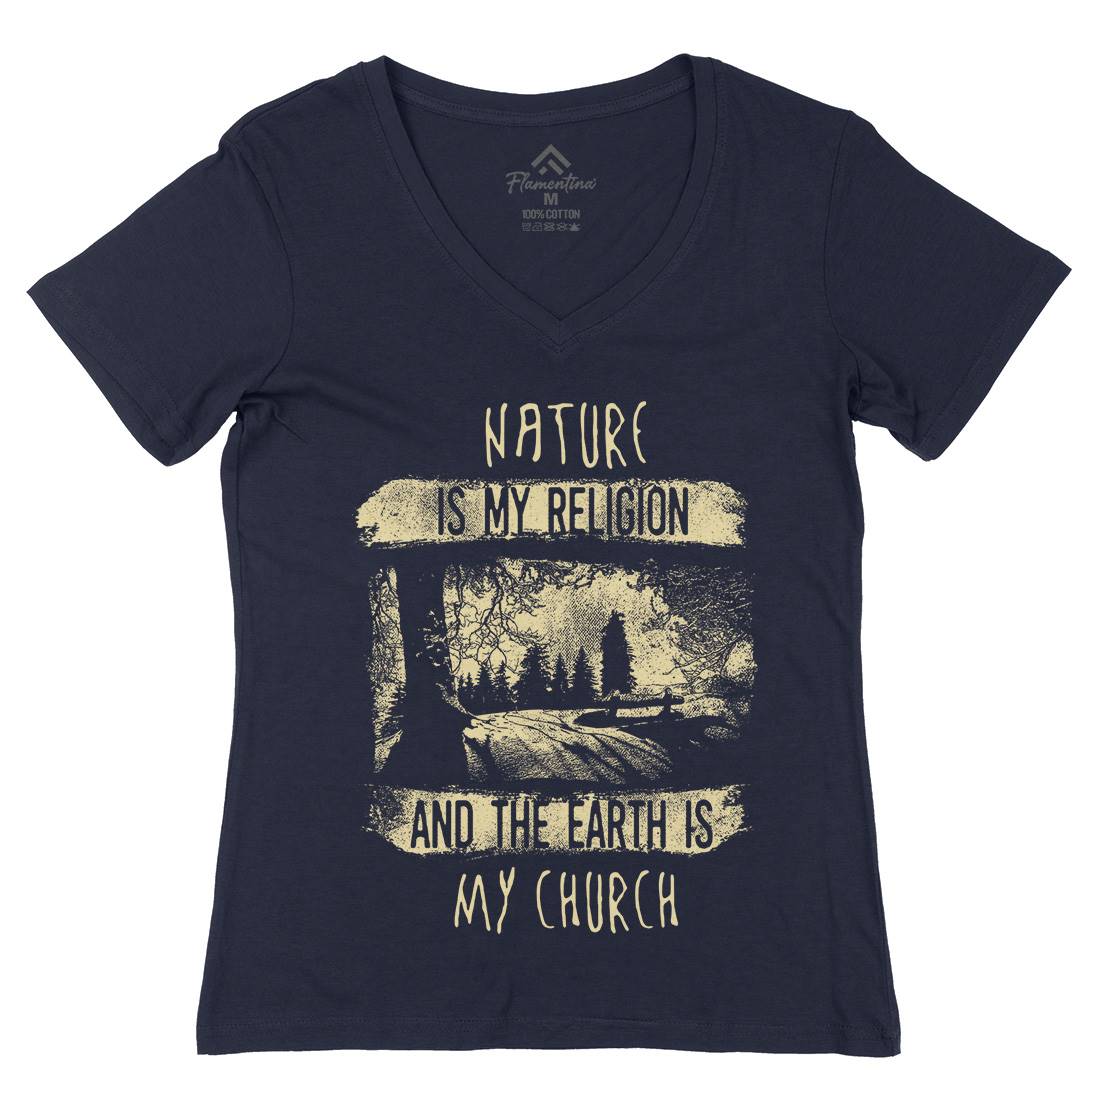 Is My Religion Womens Organic V-Neck T-Shirt Nature C967